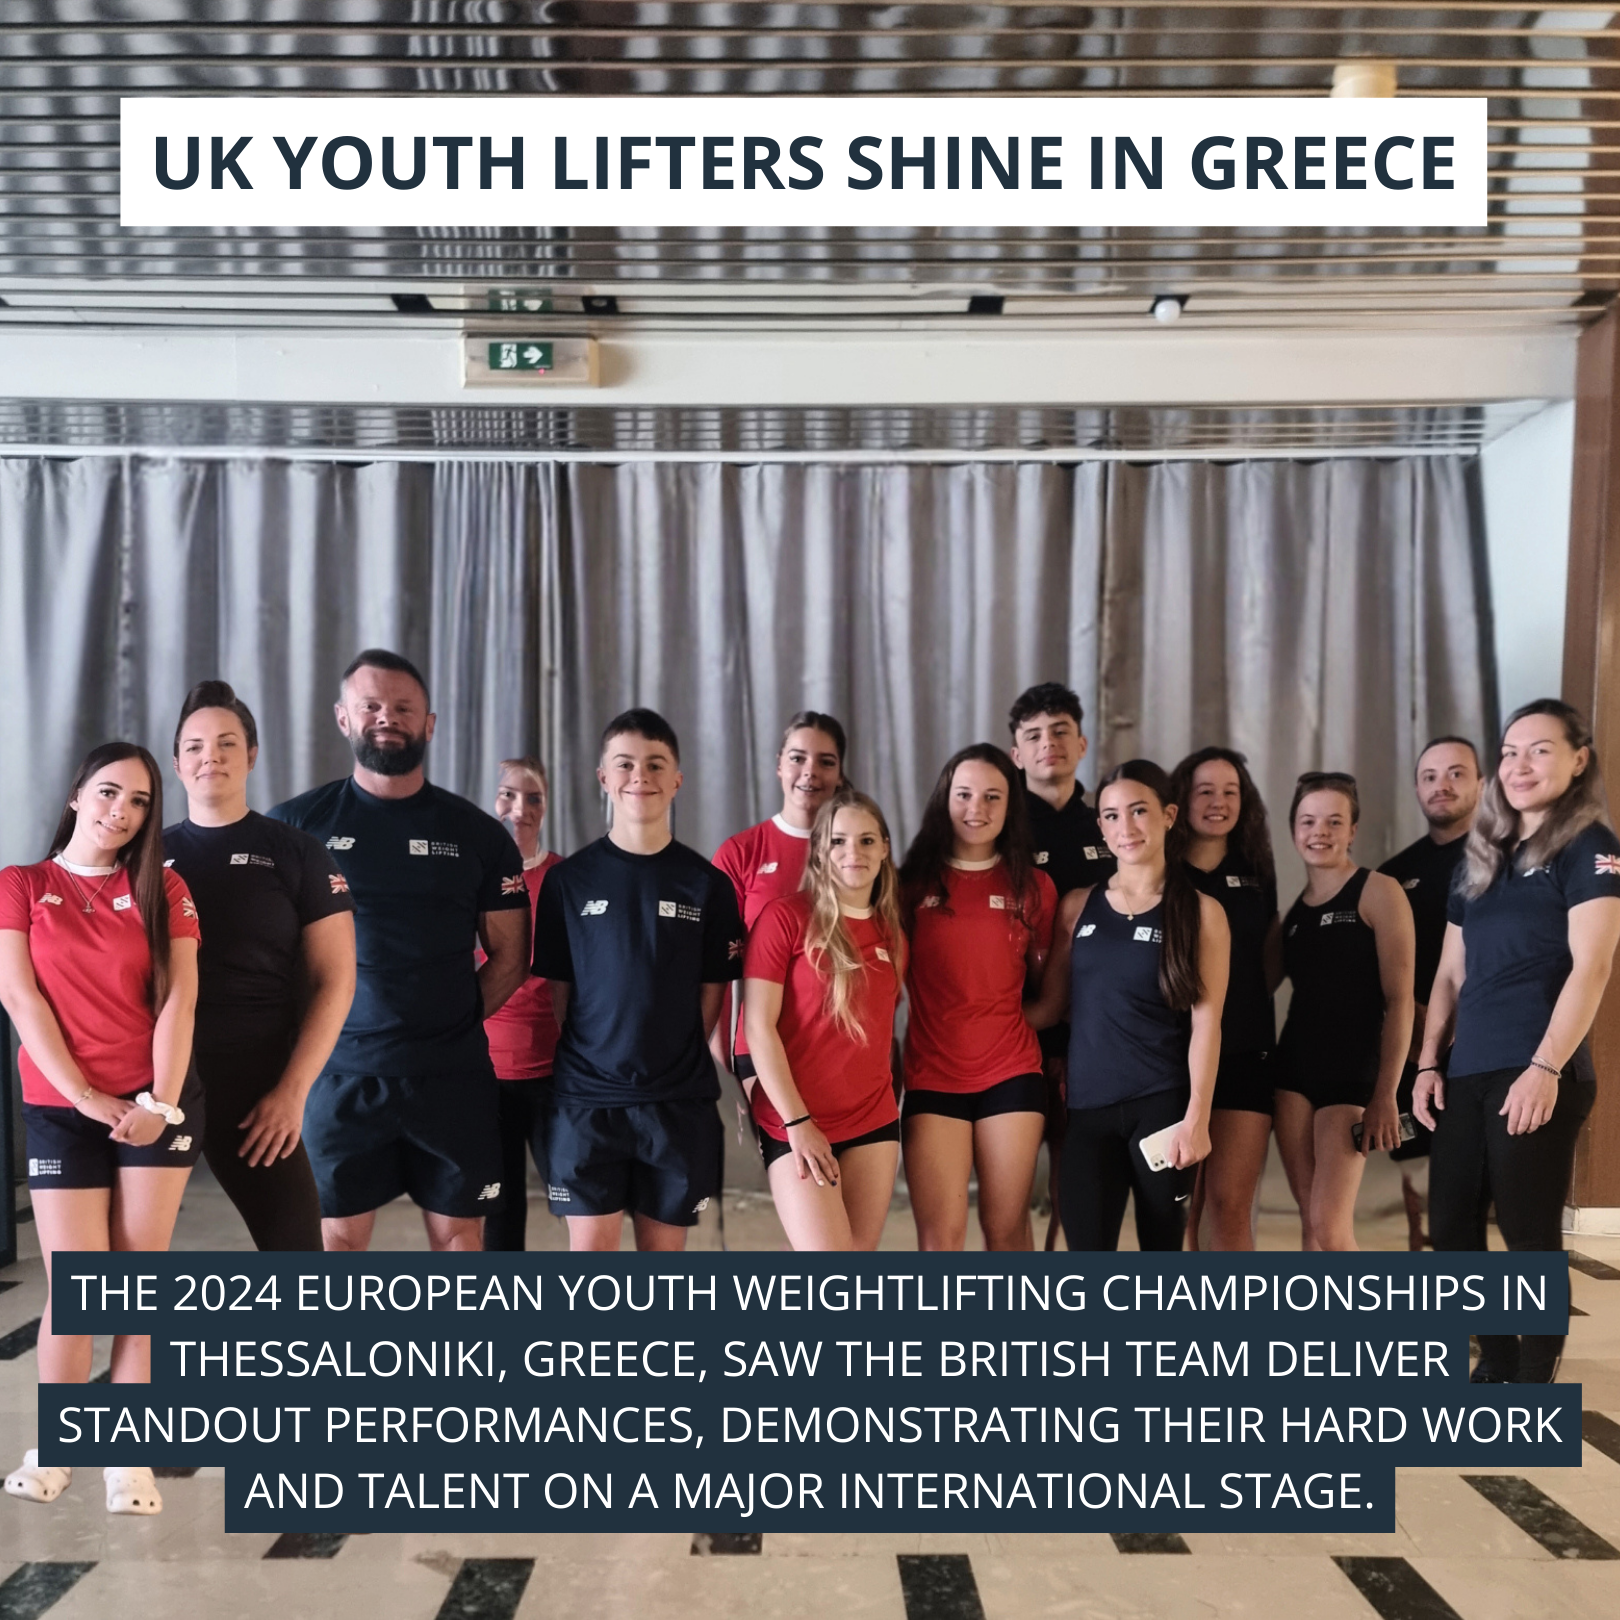 UK Youth Lifters Shine in Greece